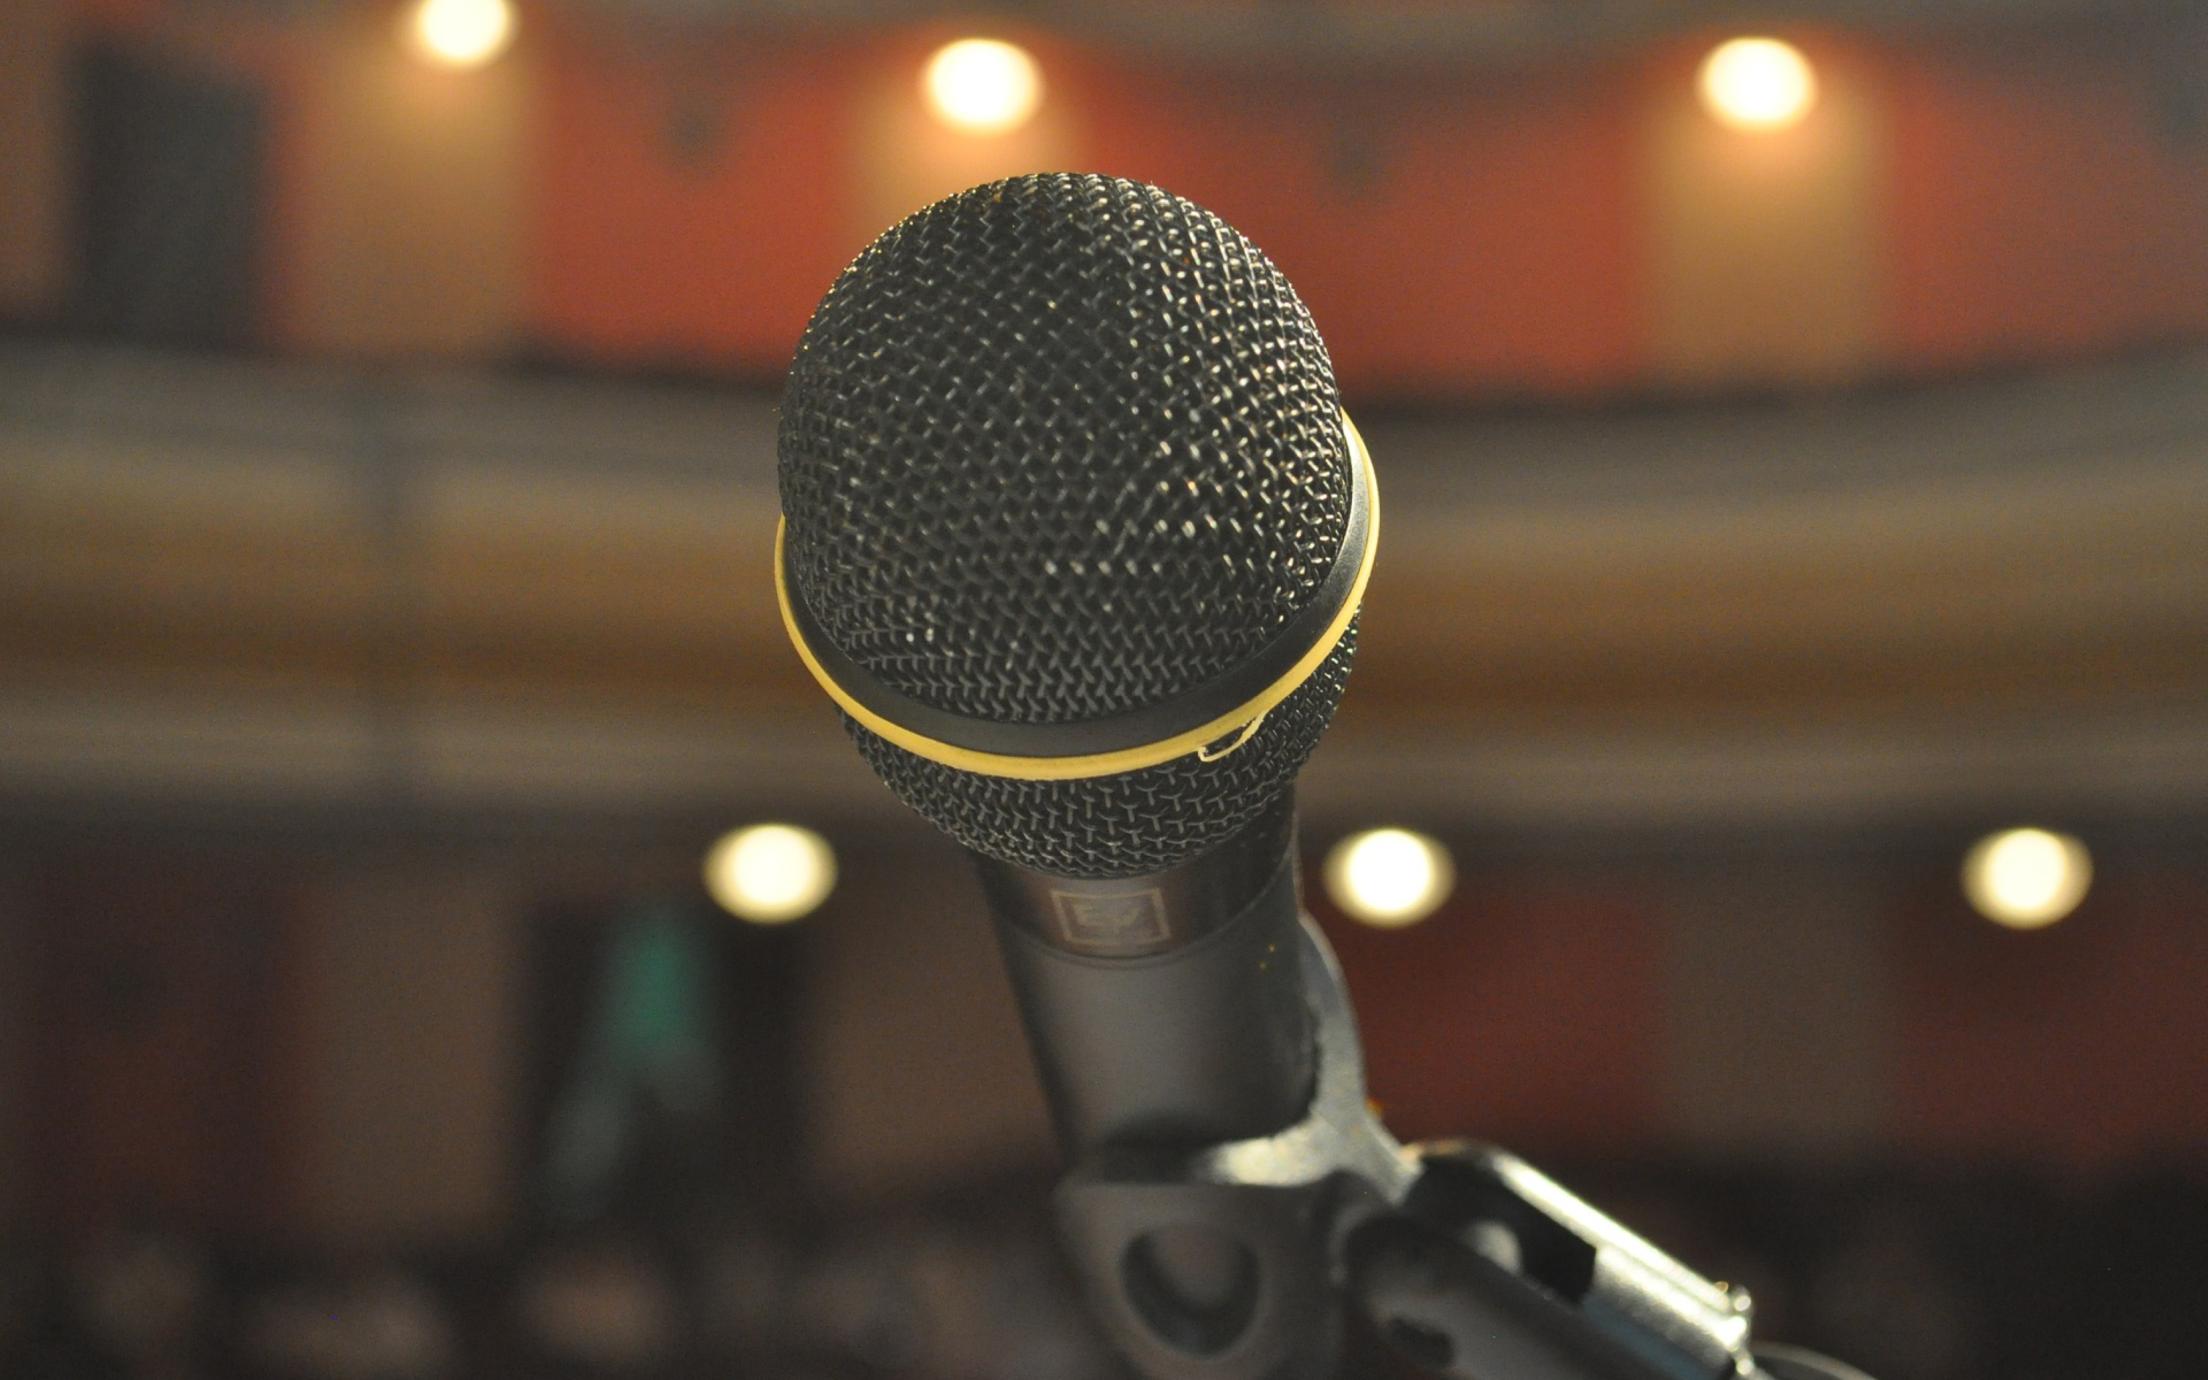 Microphone in focus with out of focus theatre type setting in the background